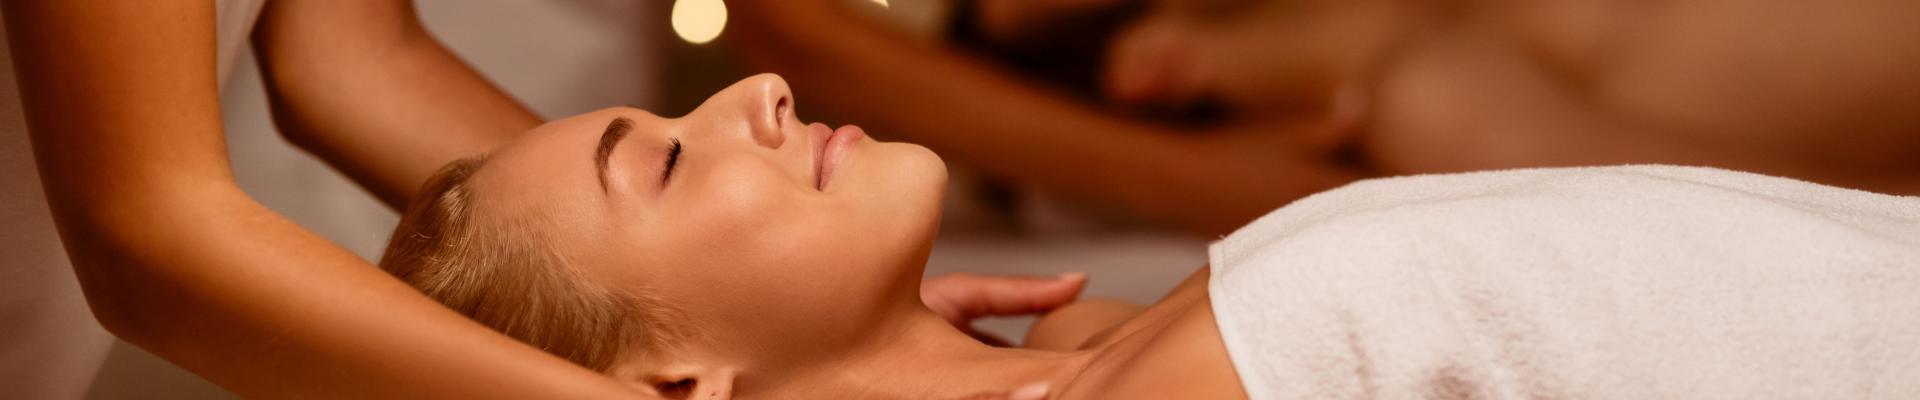 Immerse yourself with your partner in a relaxation and well-being experience in our spa